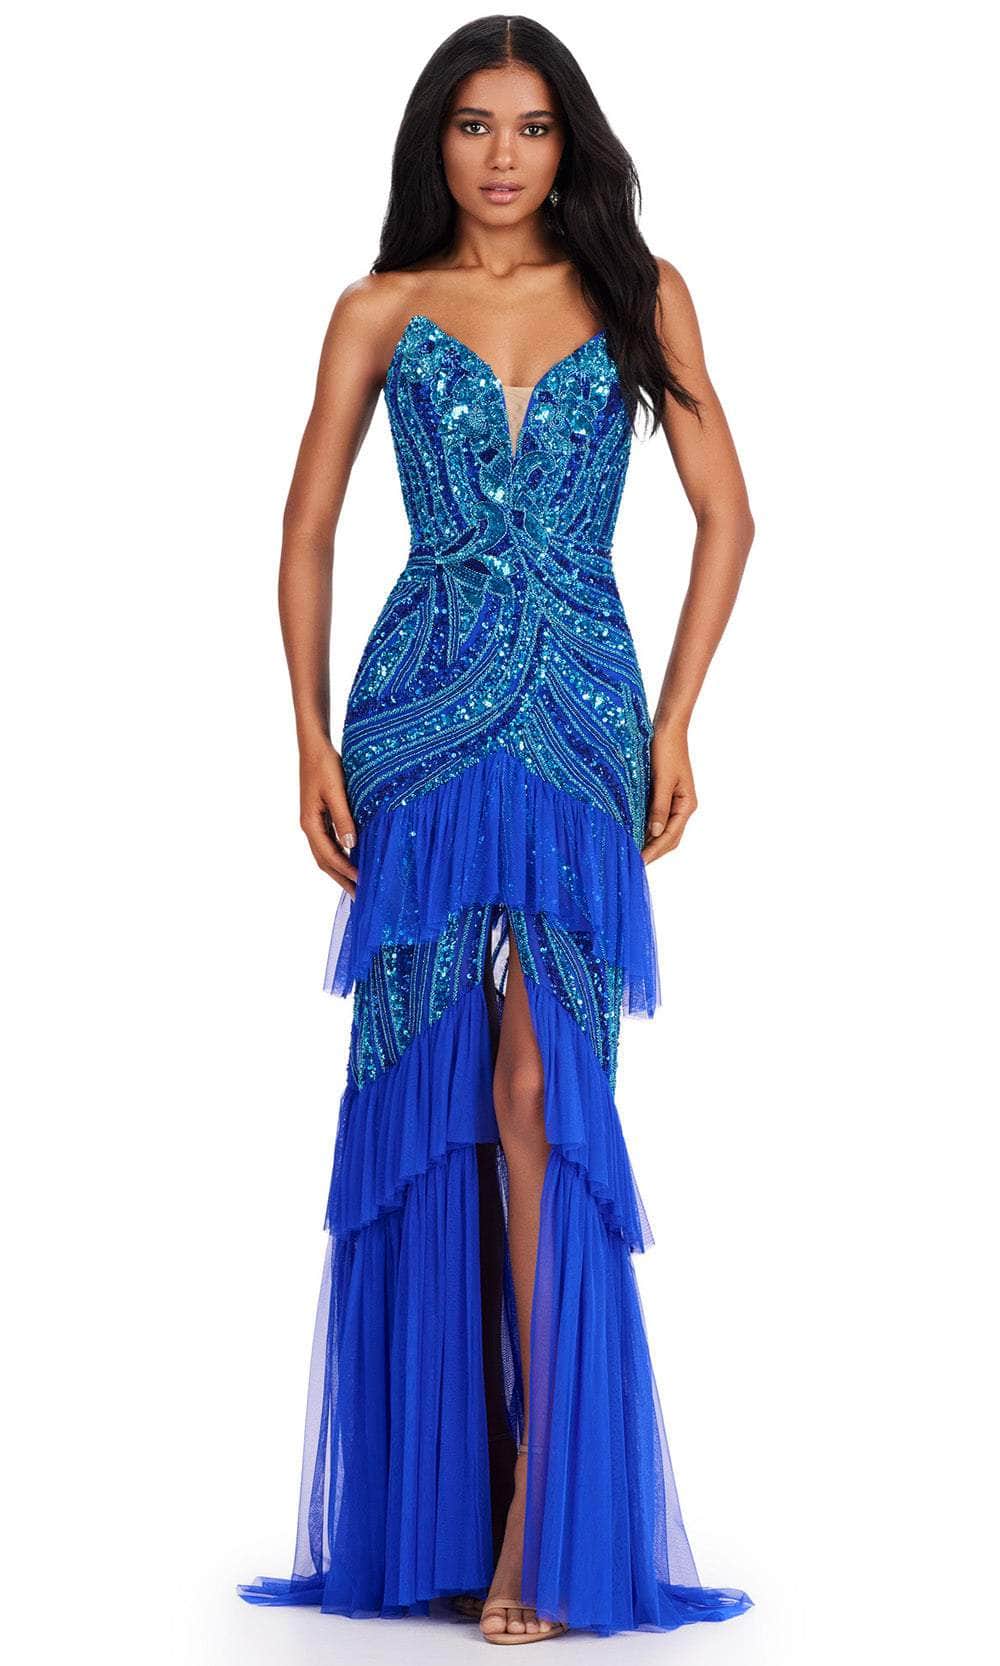 Ashley Lauren 11438 - Ruffle Tiered Prom Dress 00 /  Turquoise / Royal